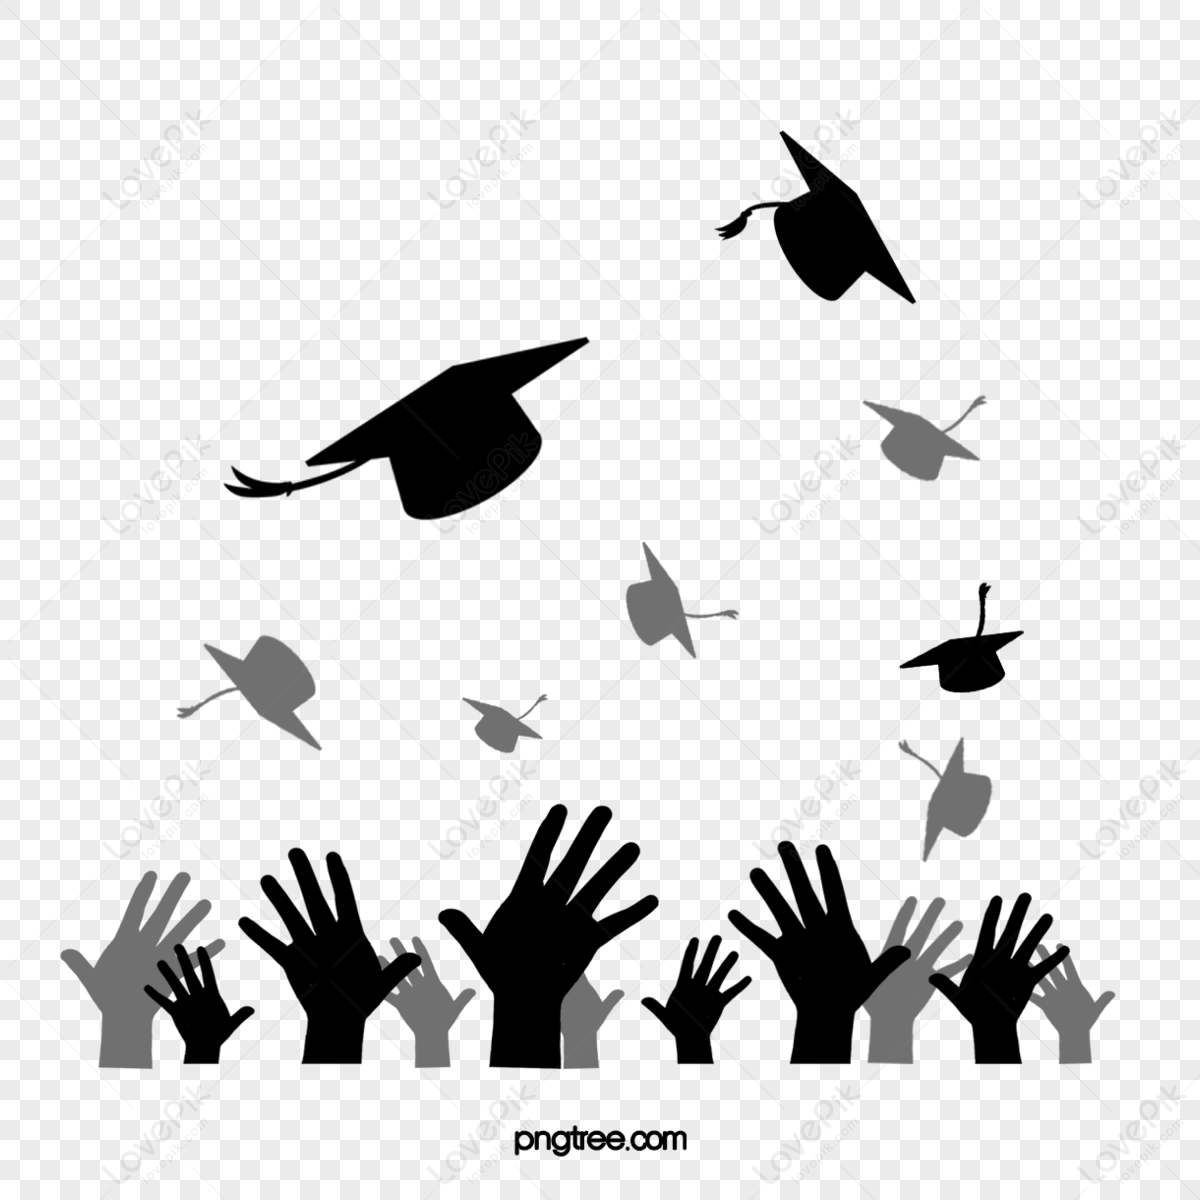 Flat Black Creative Silhouette Of Graduation Cap Thrown By Many Hands ...